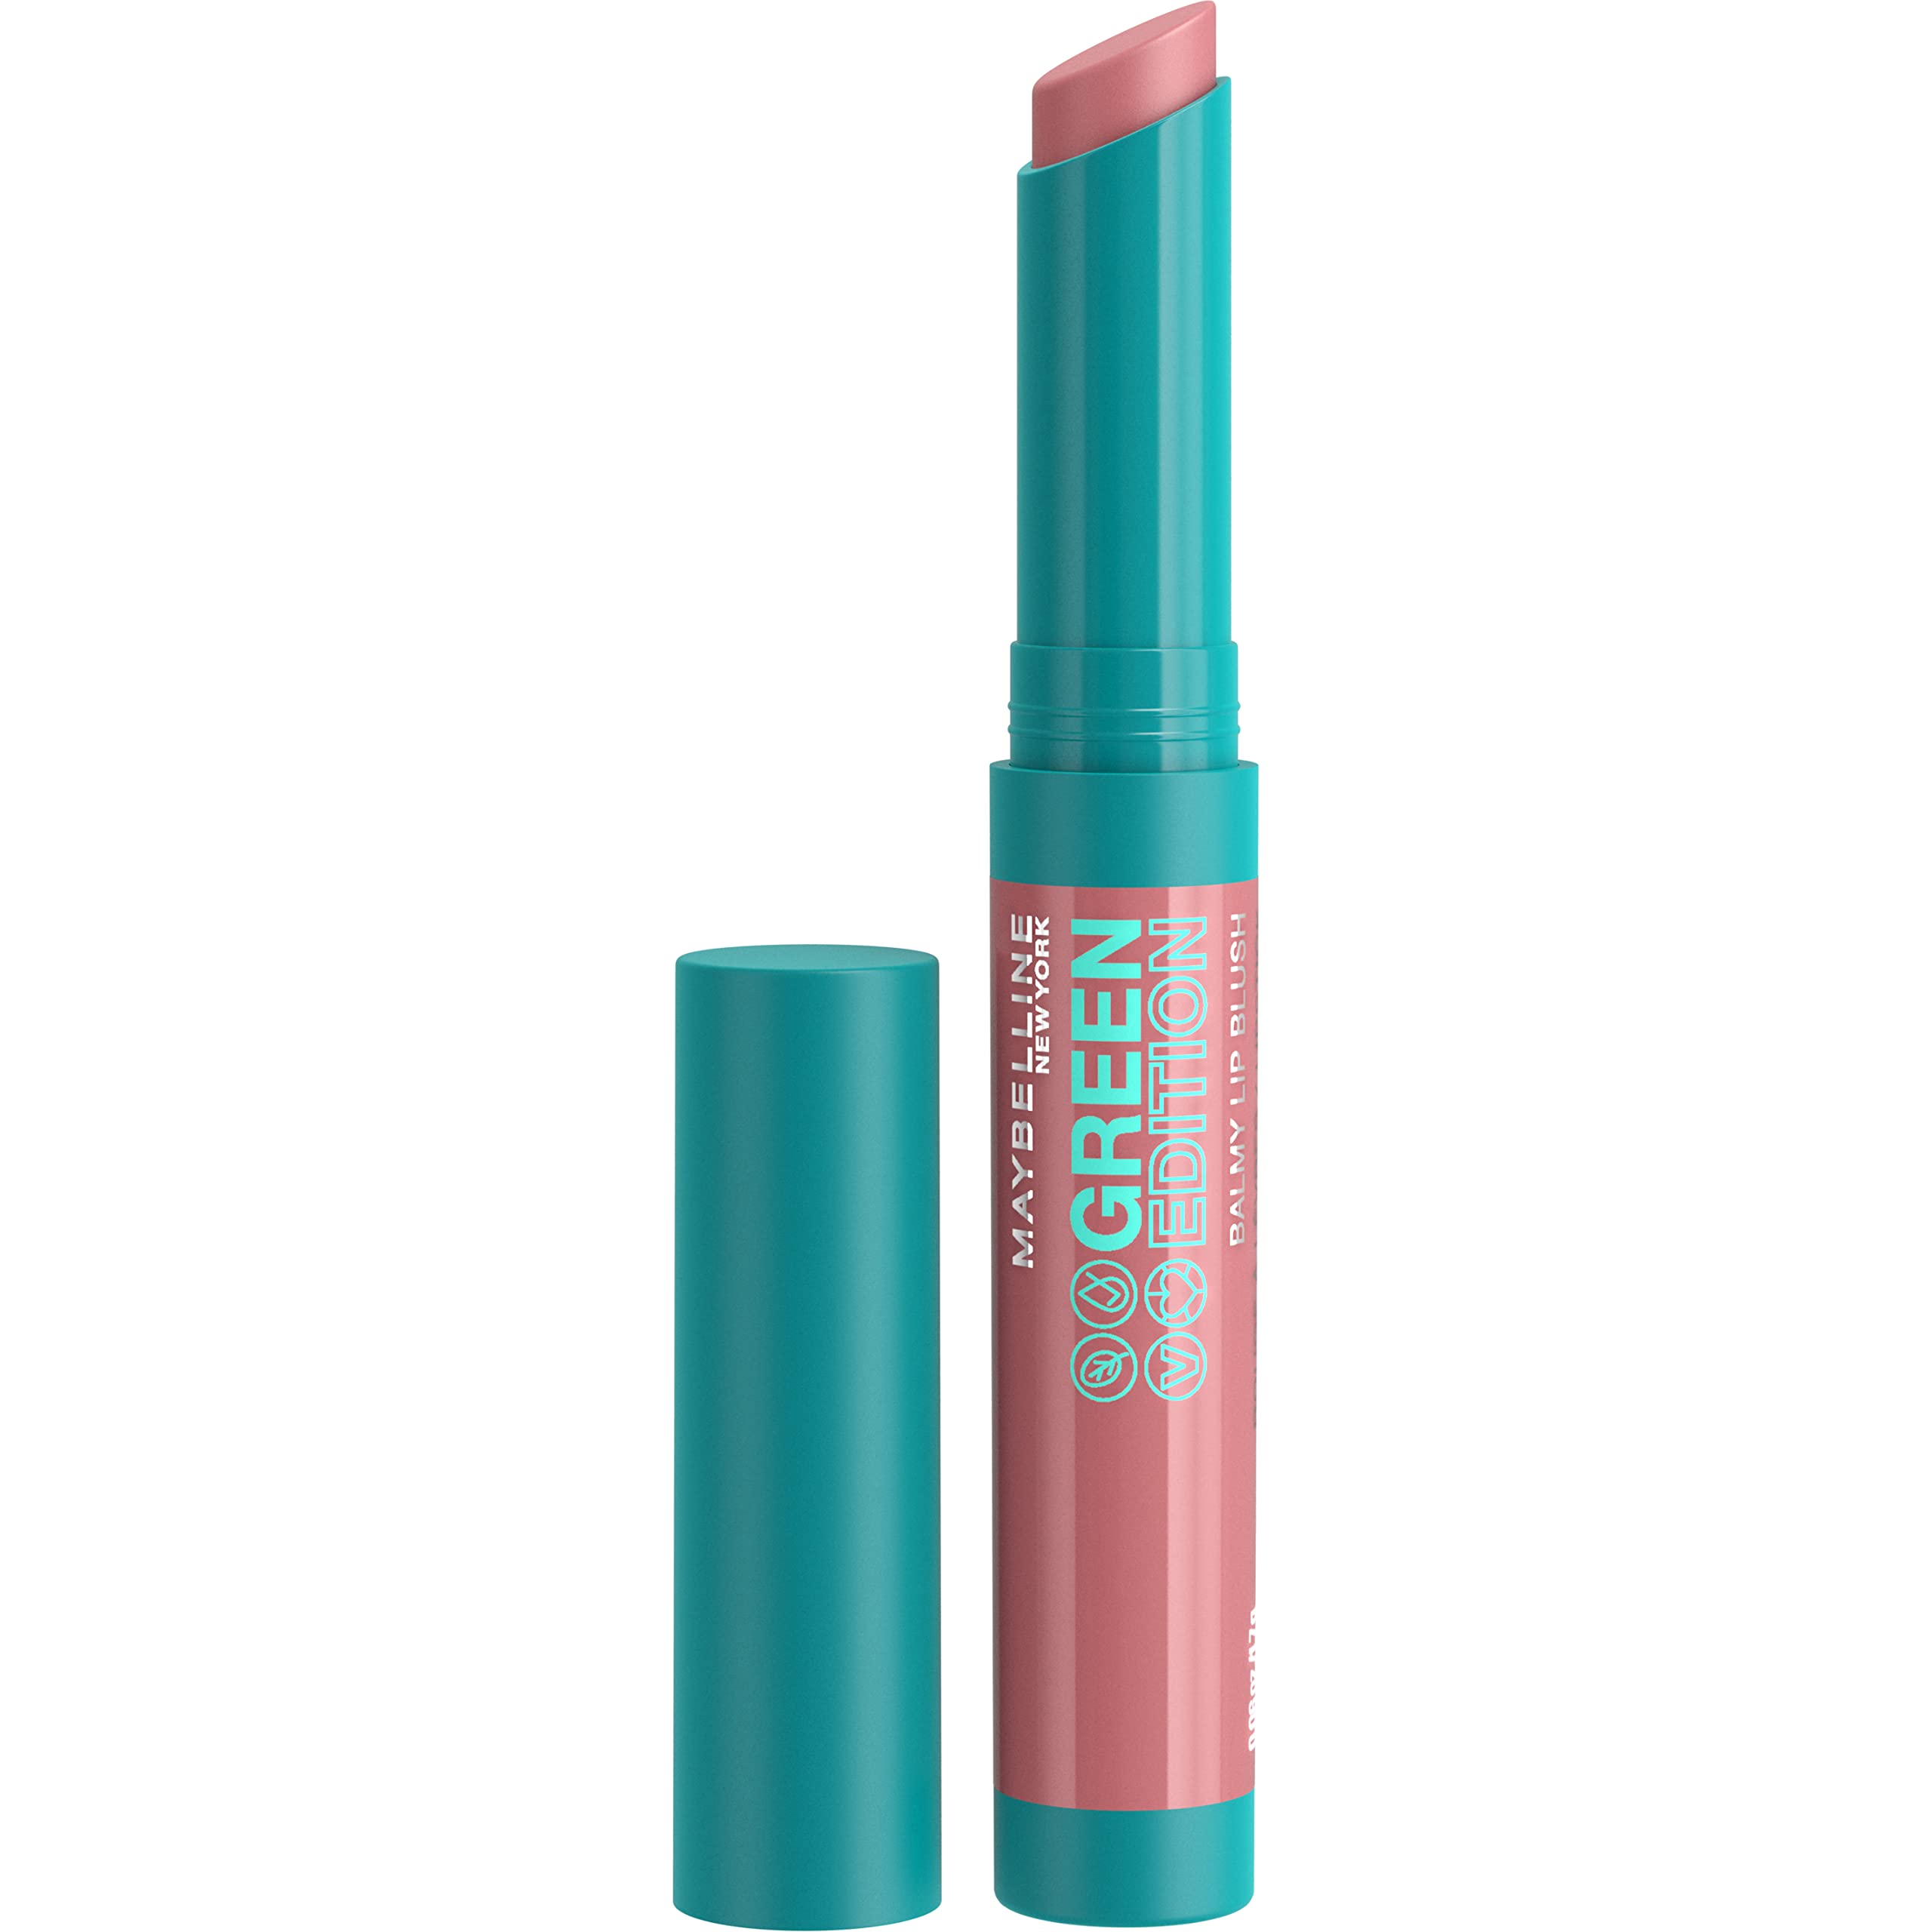 Maybelline Green Edition Balmy Lip Blush Formulated With Mango Oil  Moonlight Pink Nude 1 Count